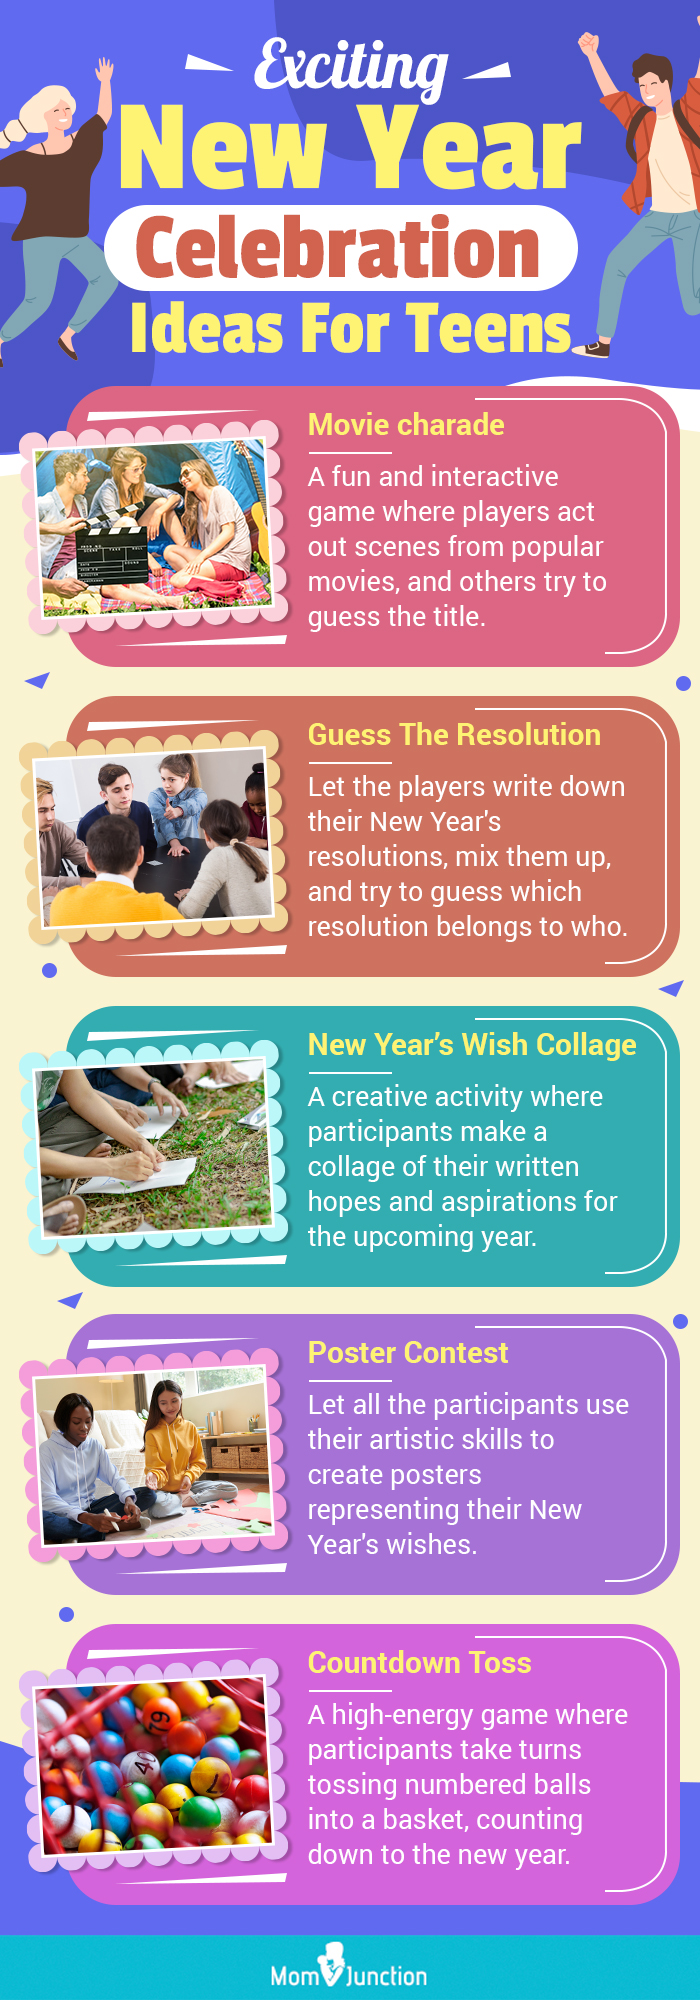 exciting new year celebration ideas for teens (infographic)